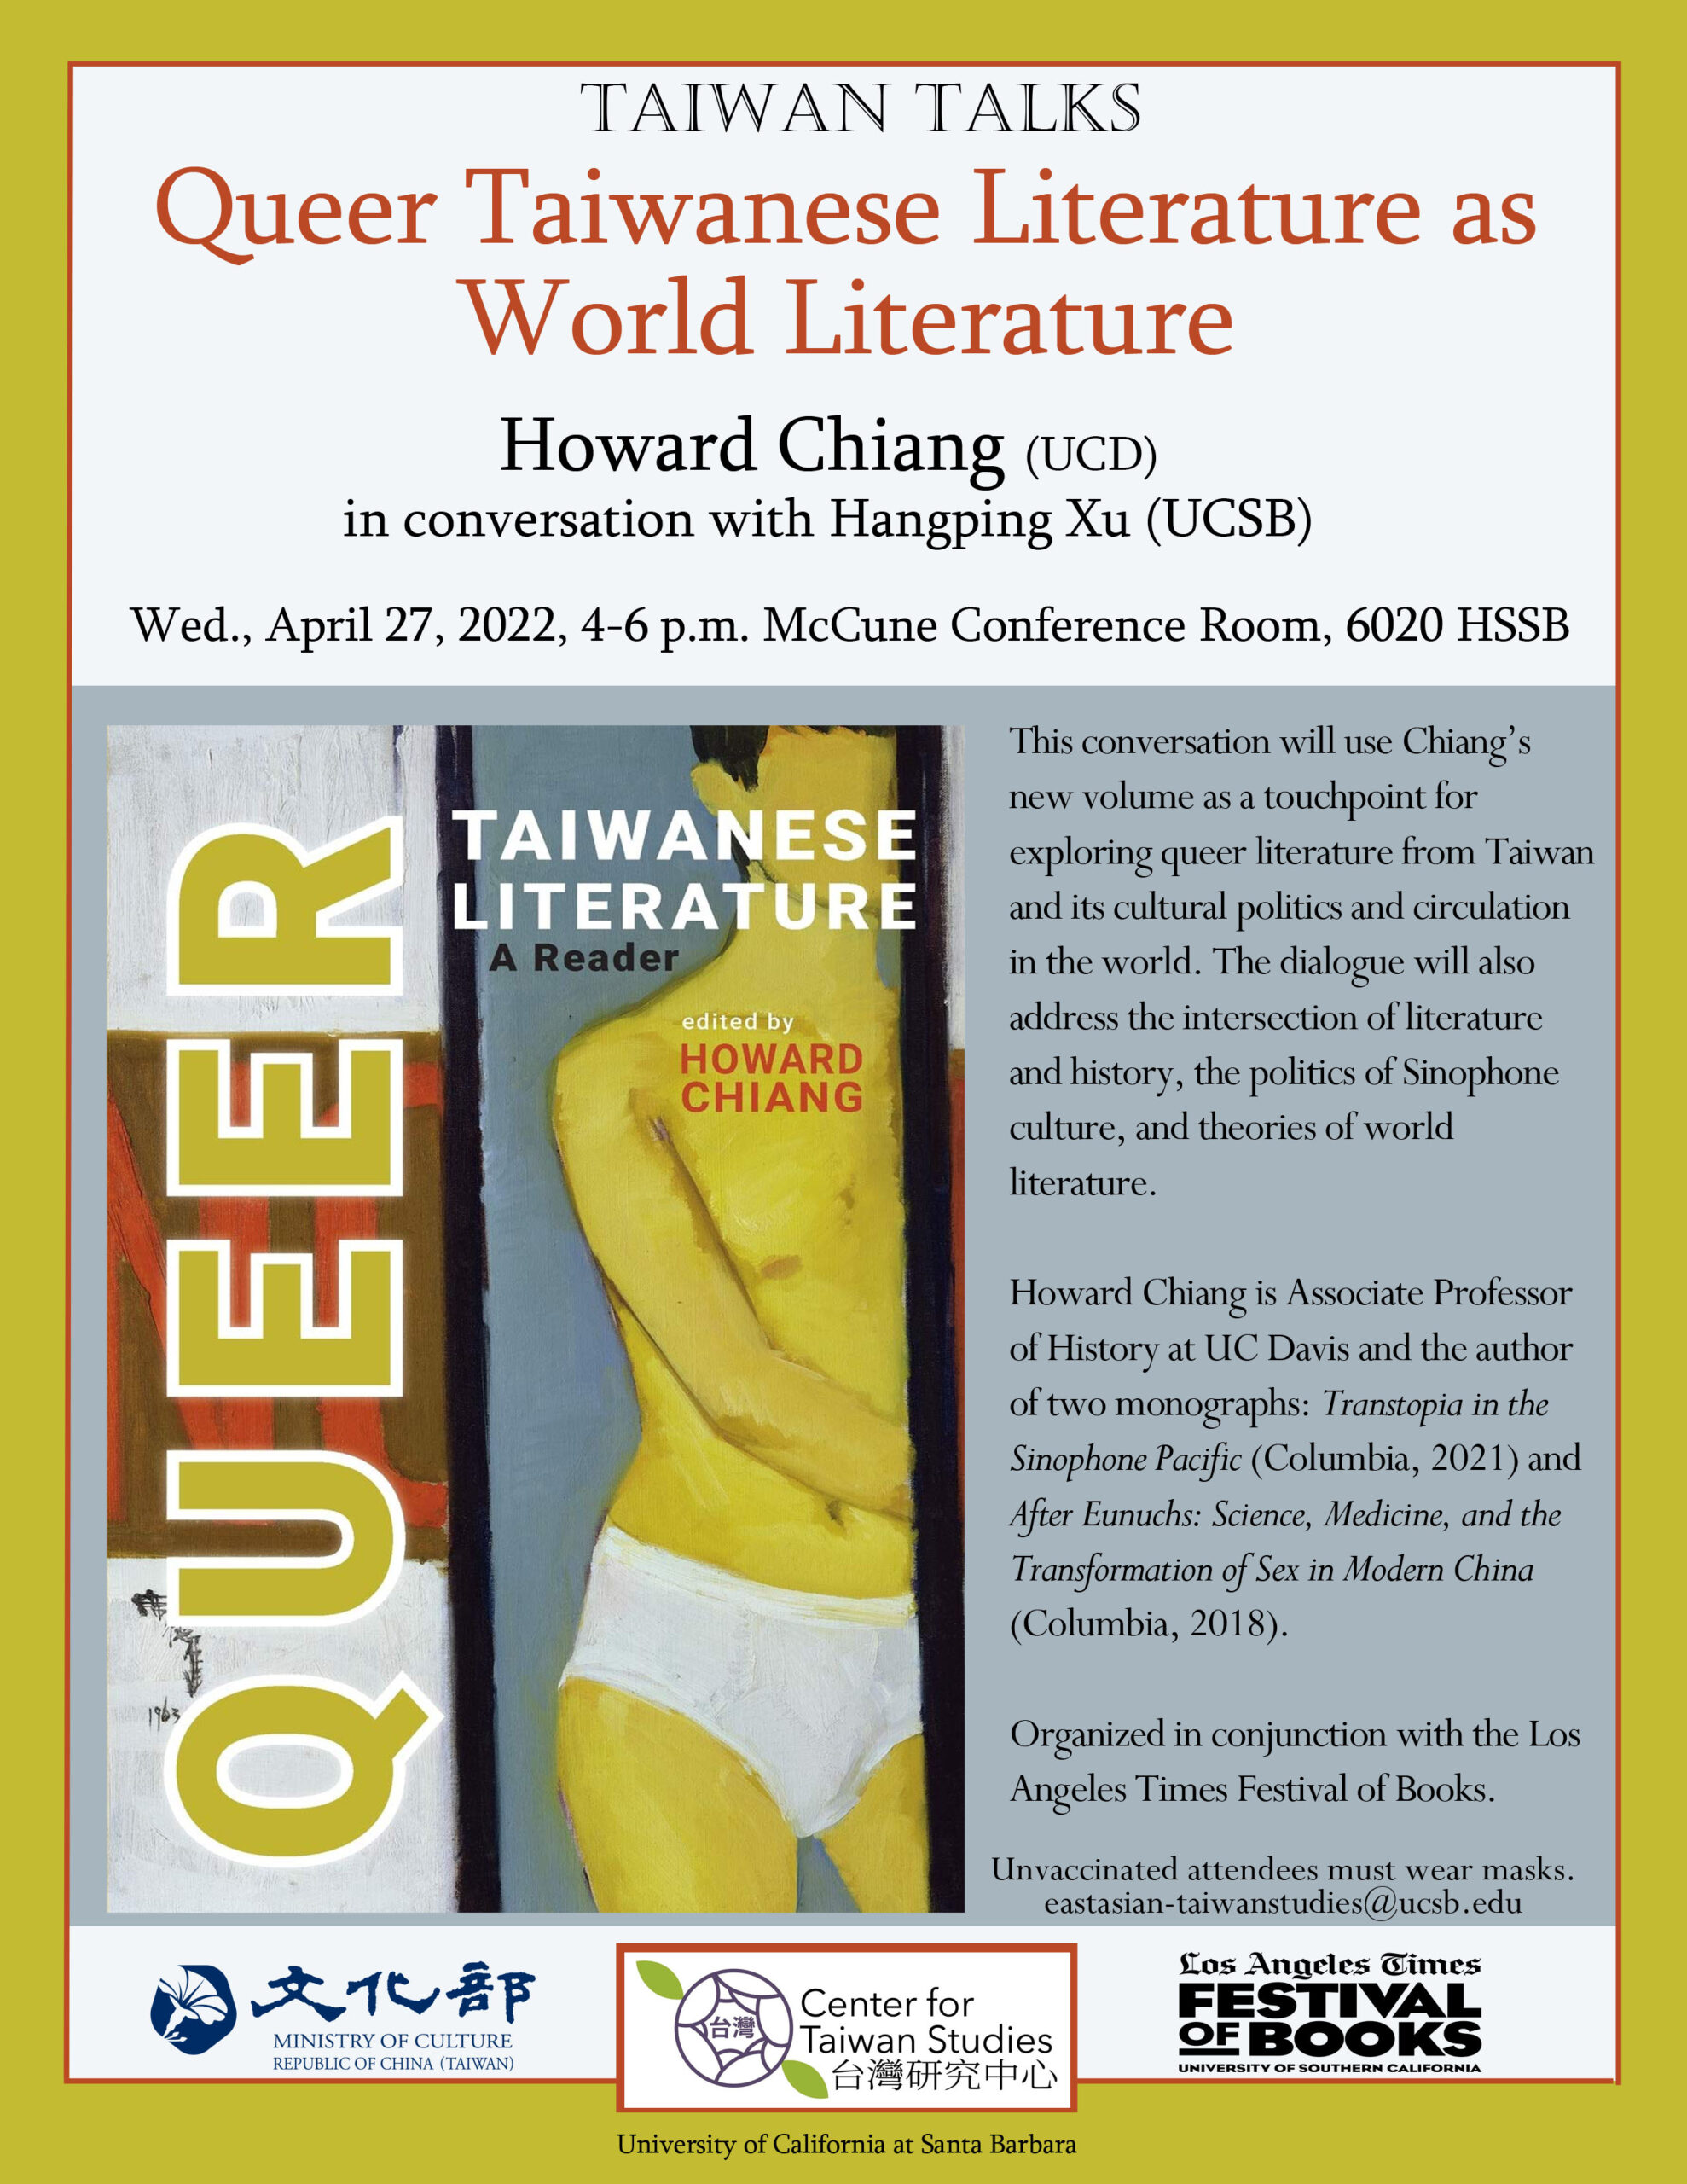 Flyer for "Taiwan Talks: Queer Taiwanese Literature as World Literature" with Howard Chiang and Hangping Xu on April 27, 2022 from 4-6PM in 6020 HSSB